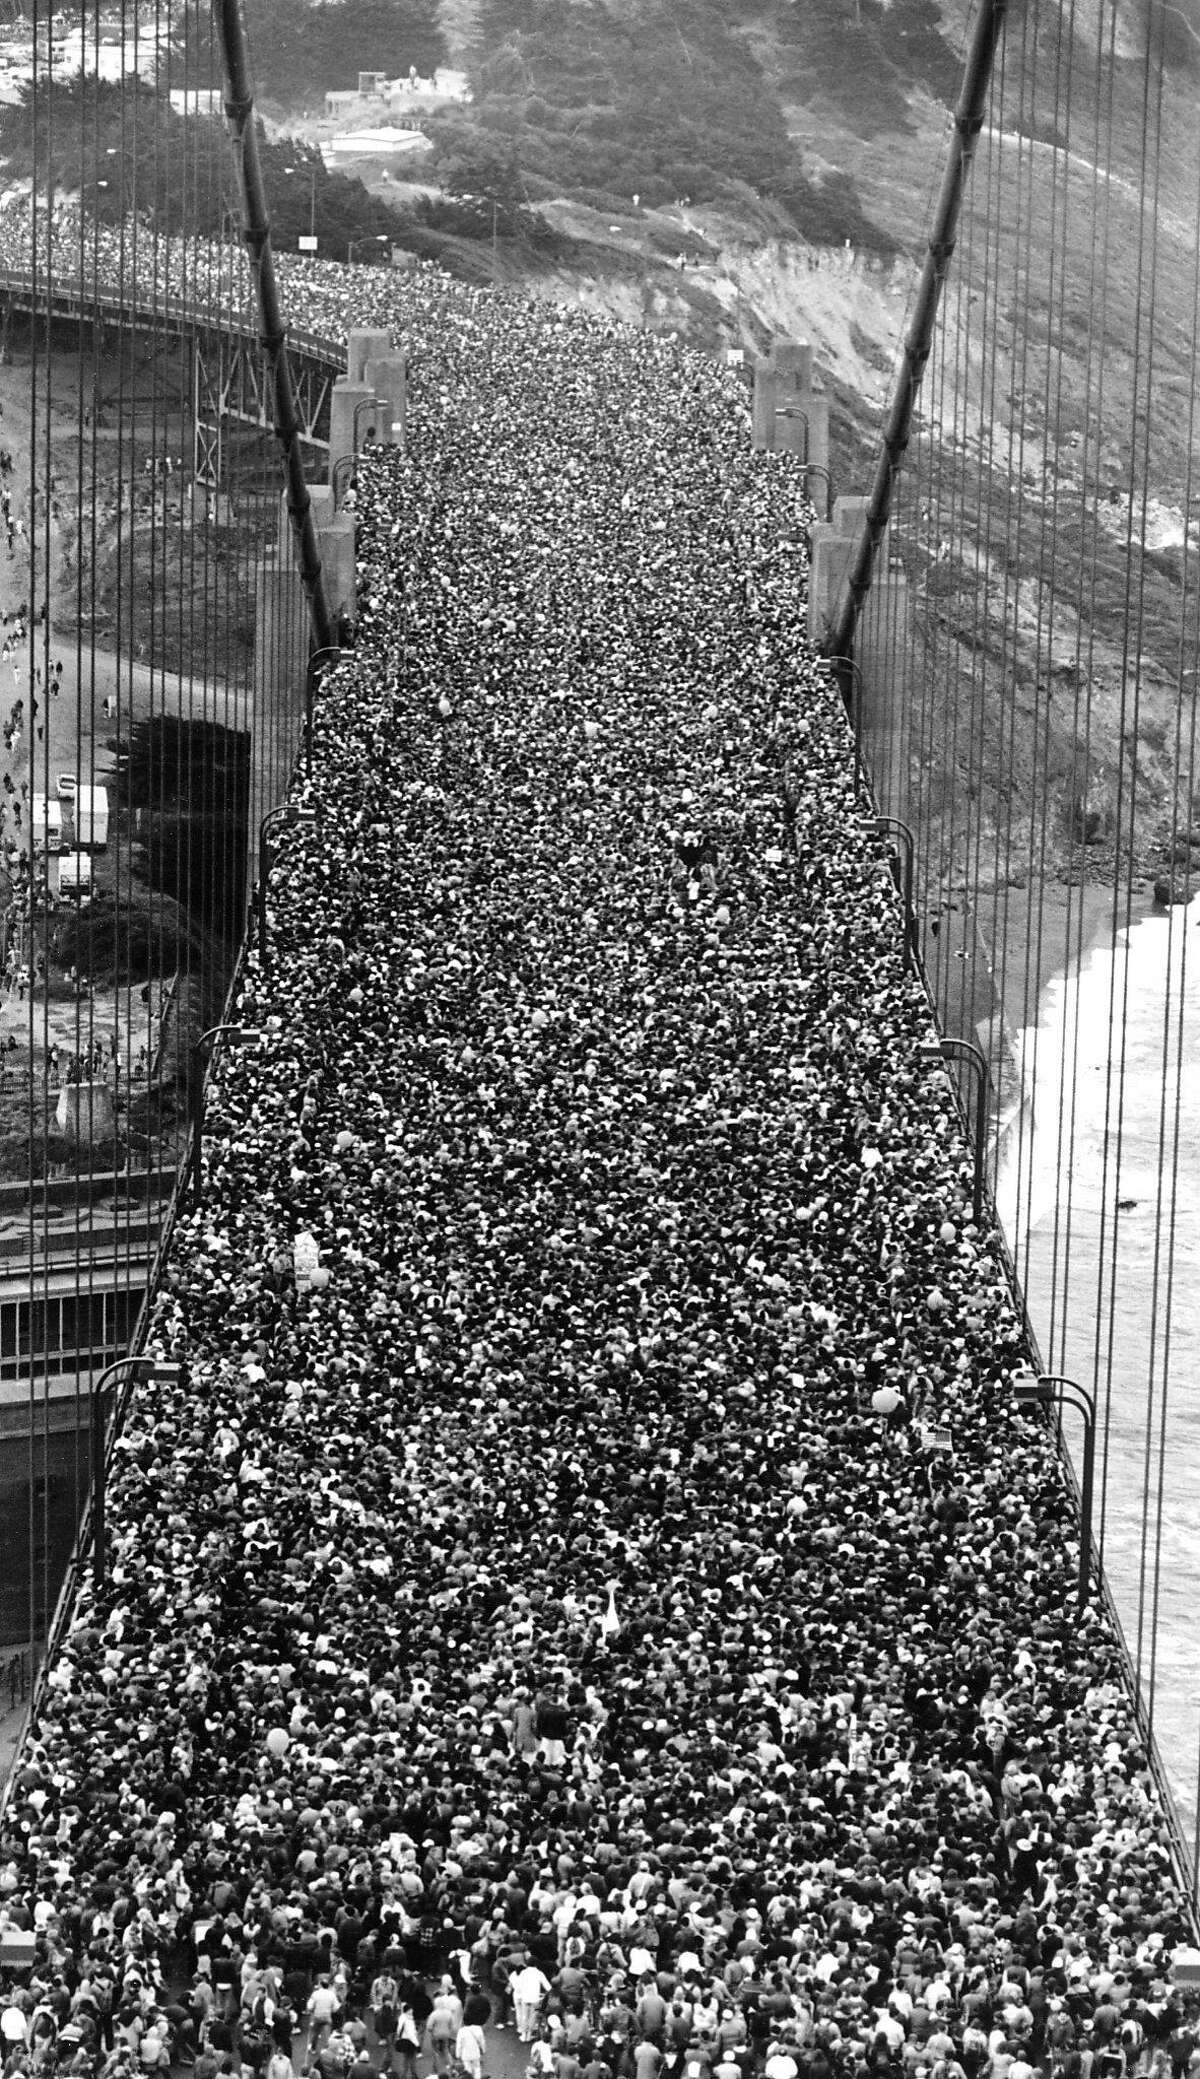 May 24, 1987 - Shot from the South Tower facing south down onto the roadway overlooking a mass of people at the 50th anniversary celebration for the Golden Gate Bridge.